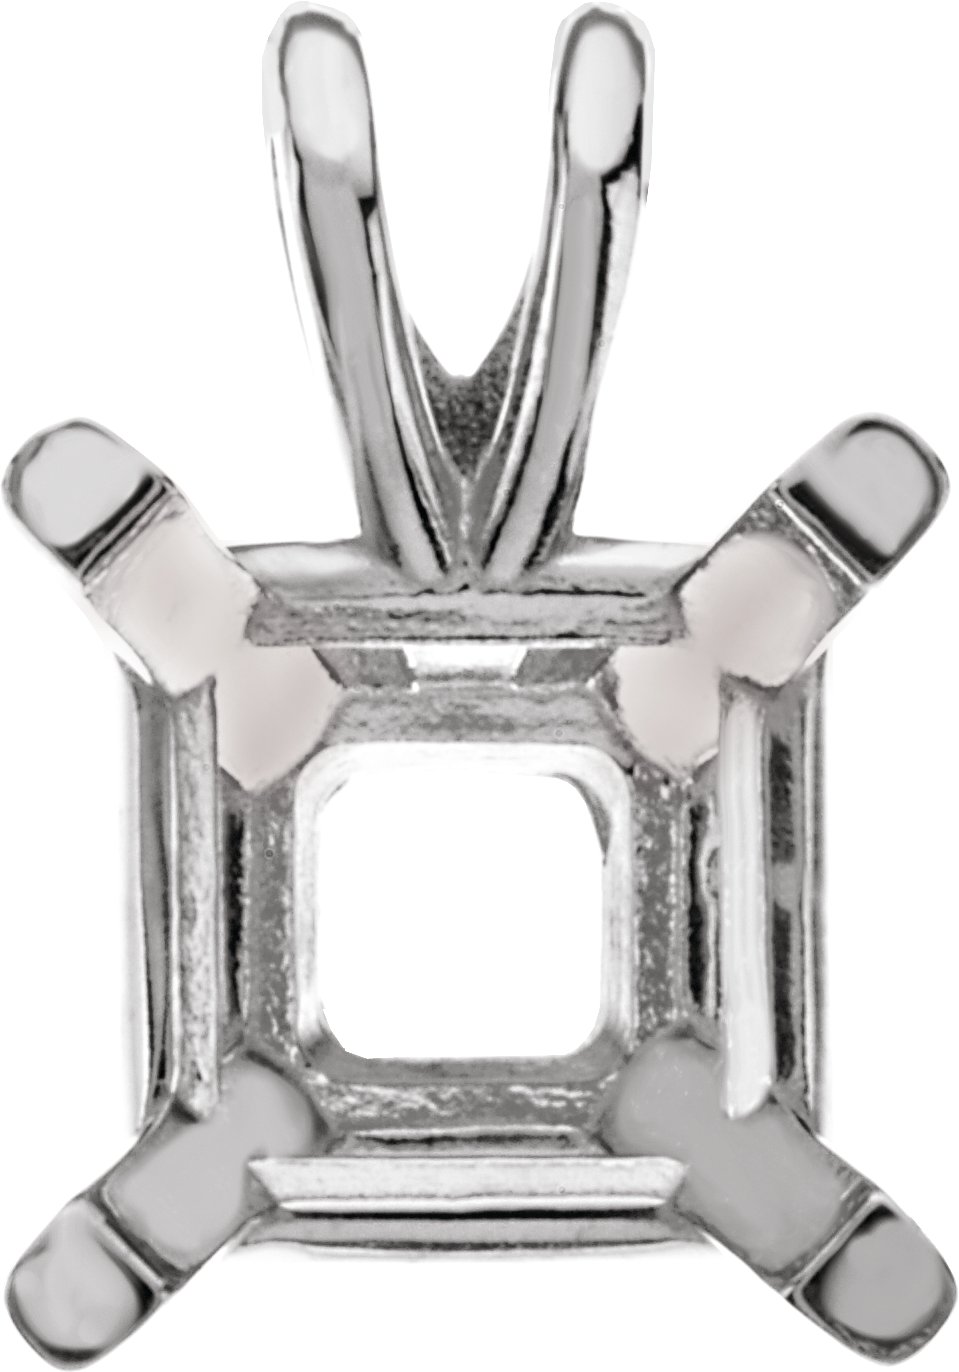 Square 4-Prong Lightweight Pendant Mounting